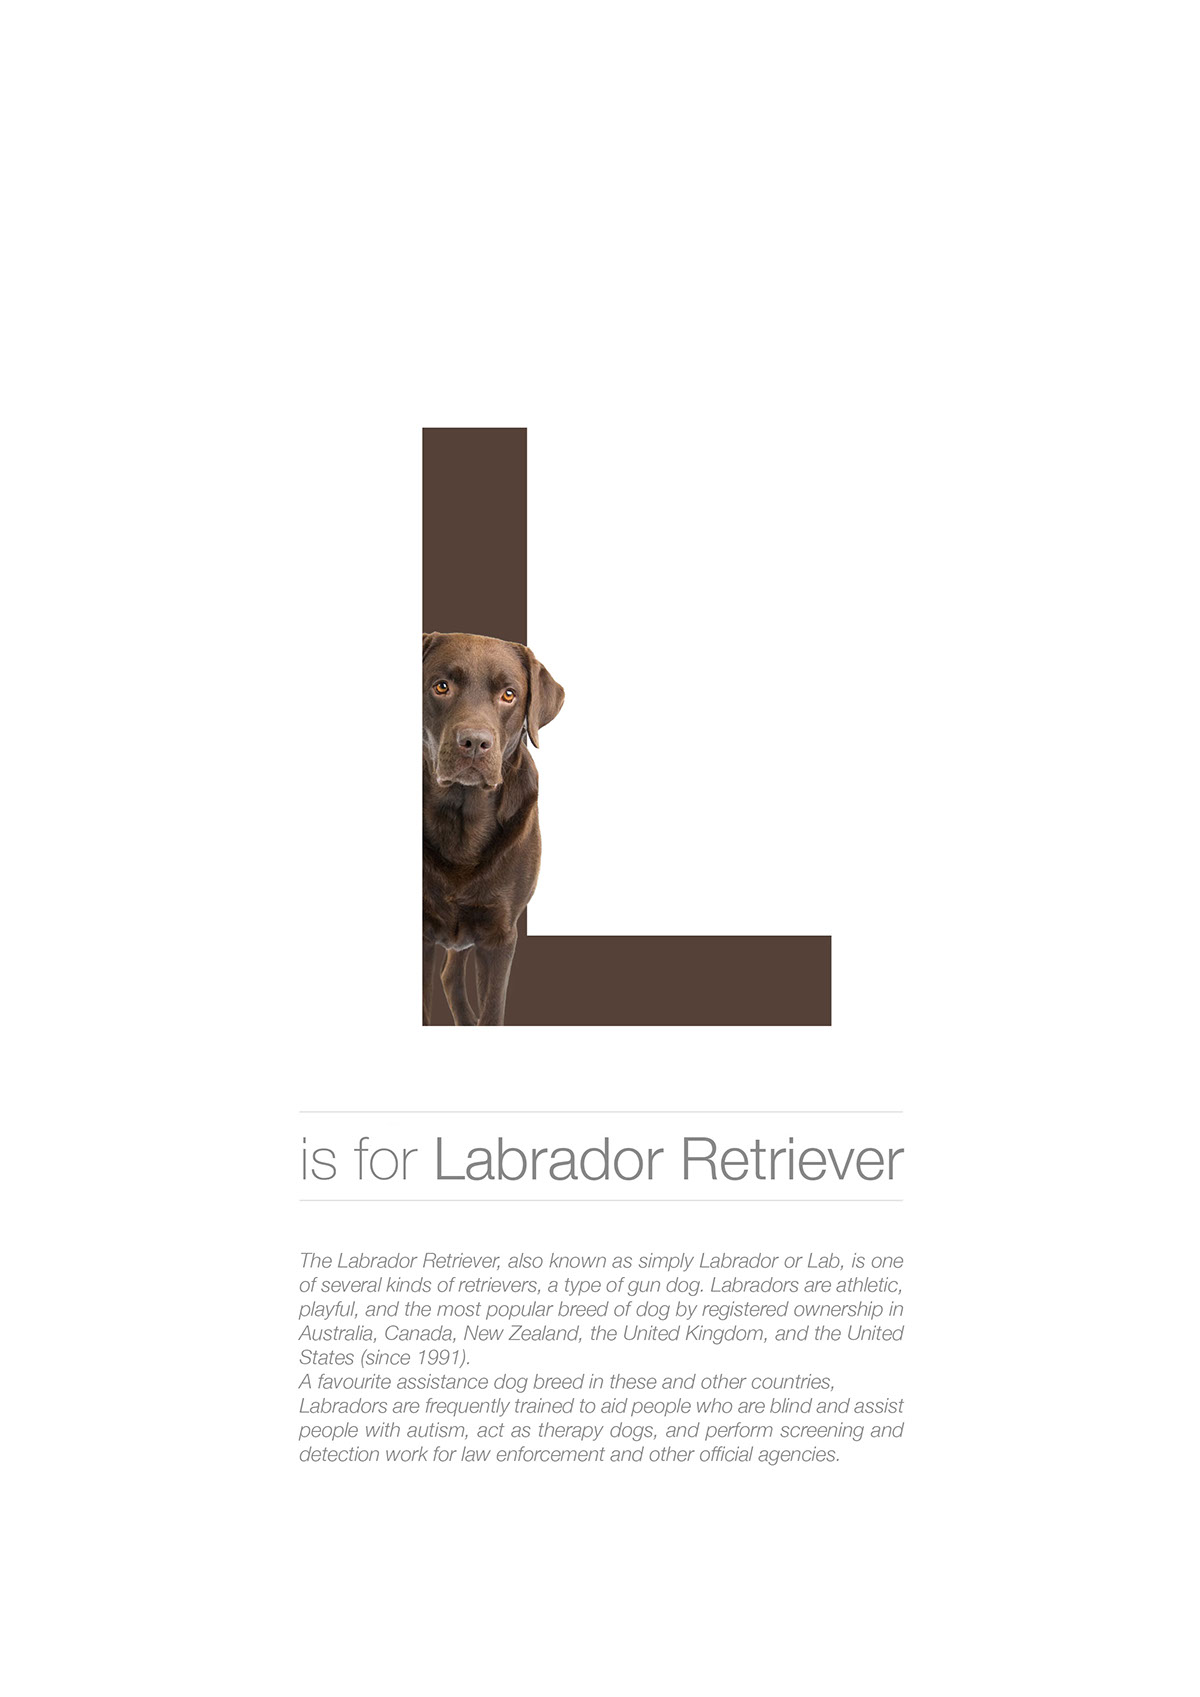 dog posters Breeds alphabet learning letters graphicdesign type